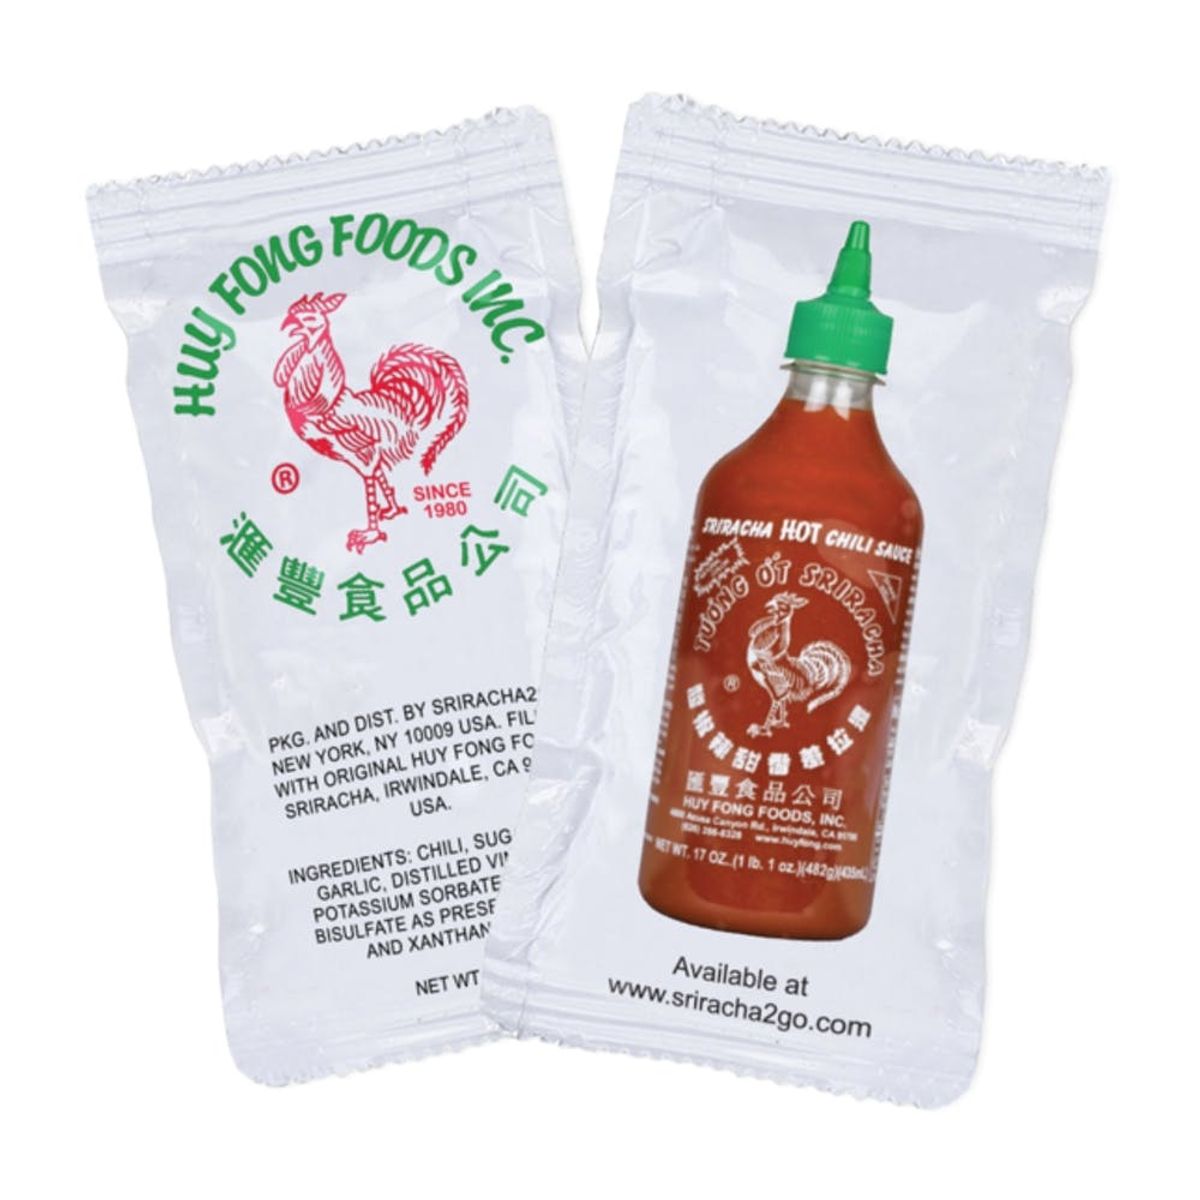 Sriracha Now Makes To-Go Packets for All Your Hot Sauce Emergencies